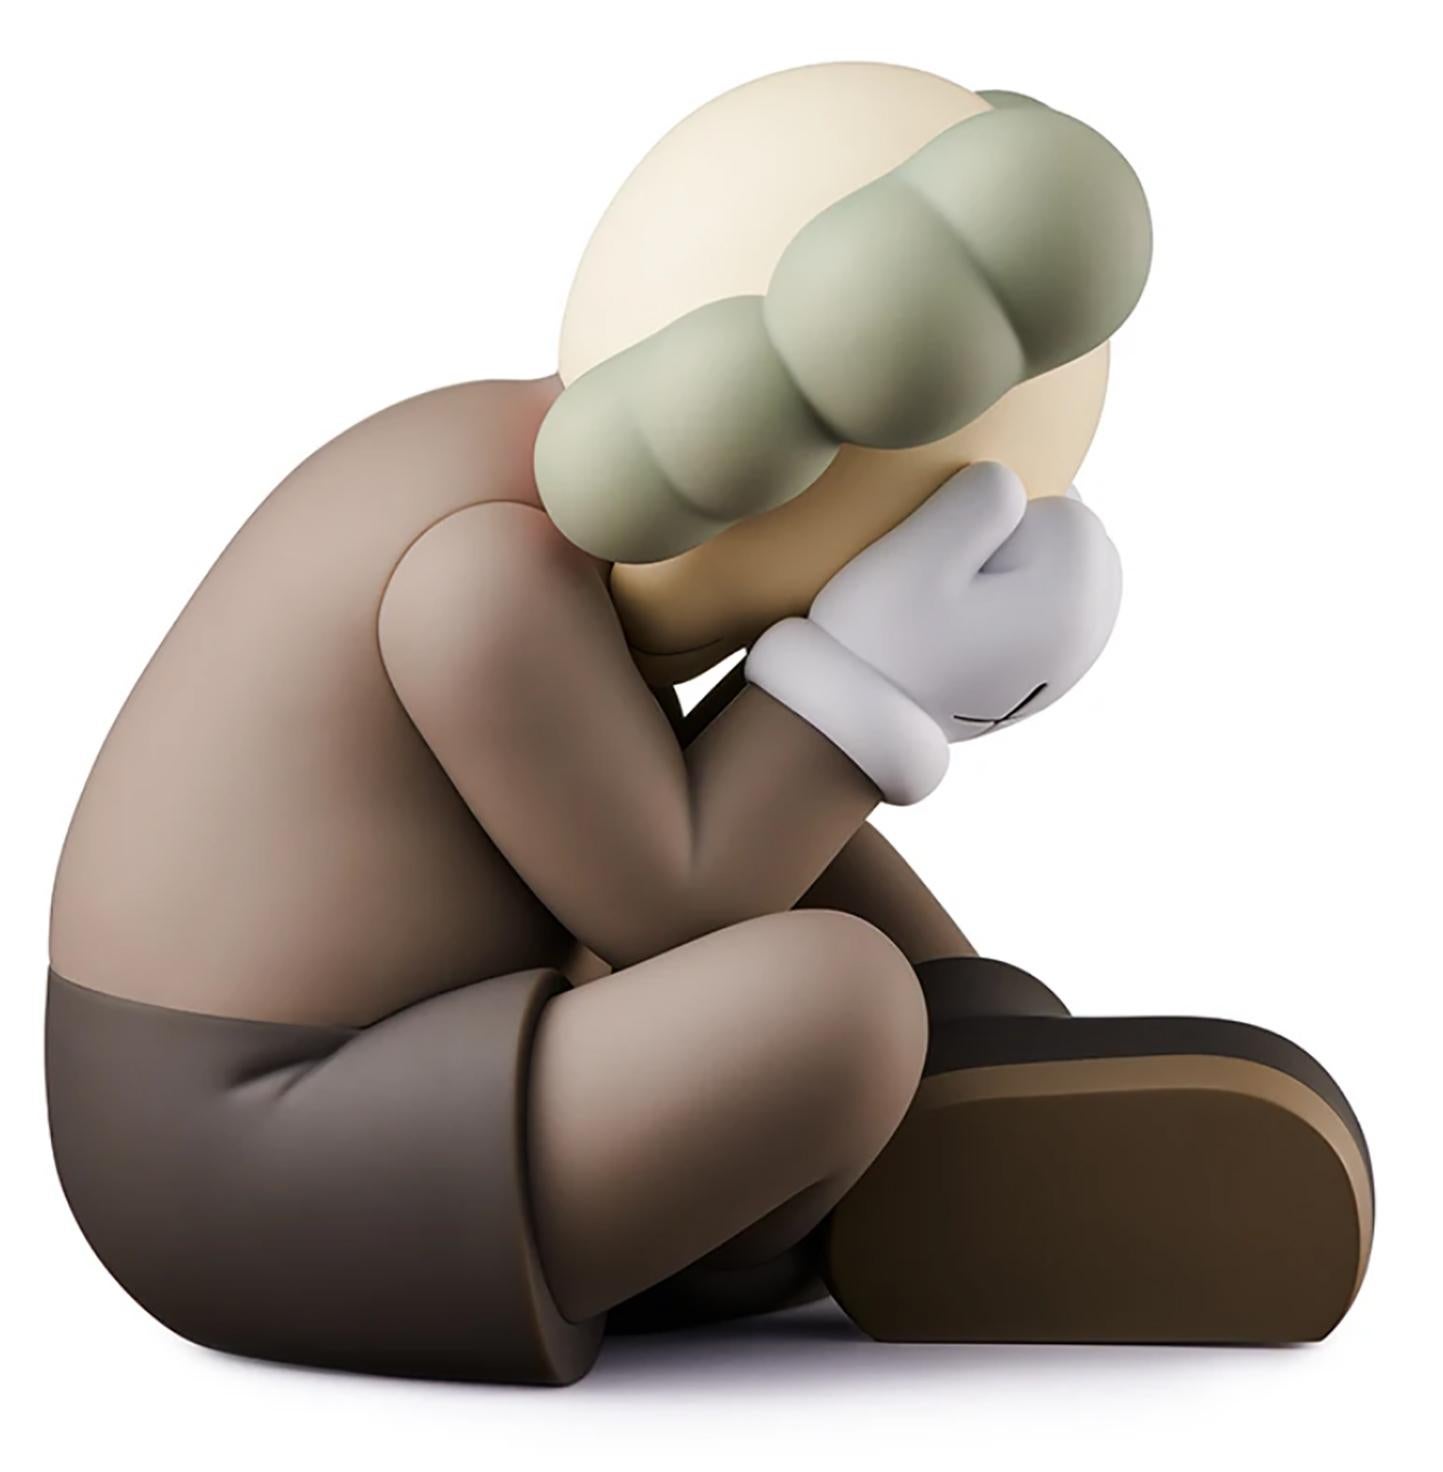 KAWS SEPARATED COMPANION: New & unopened in its original packaging:
This highly collectible brown KAWS SEPARATED figure is derived from the Brooklyn based artist’s larger scale sculpture of same (originally constructed in 2019), and is a key